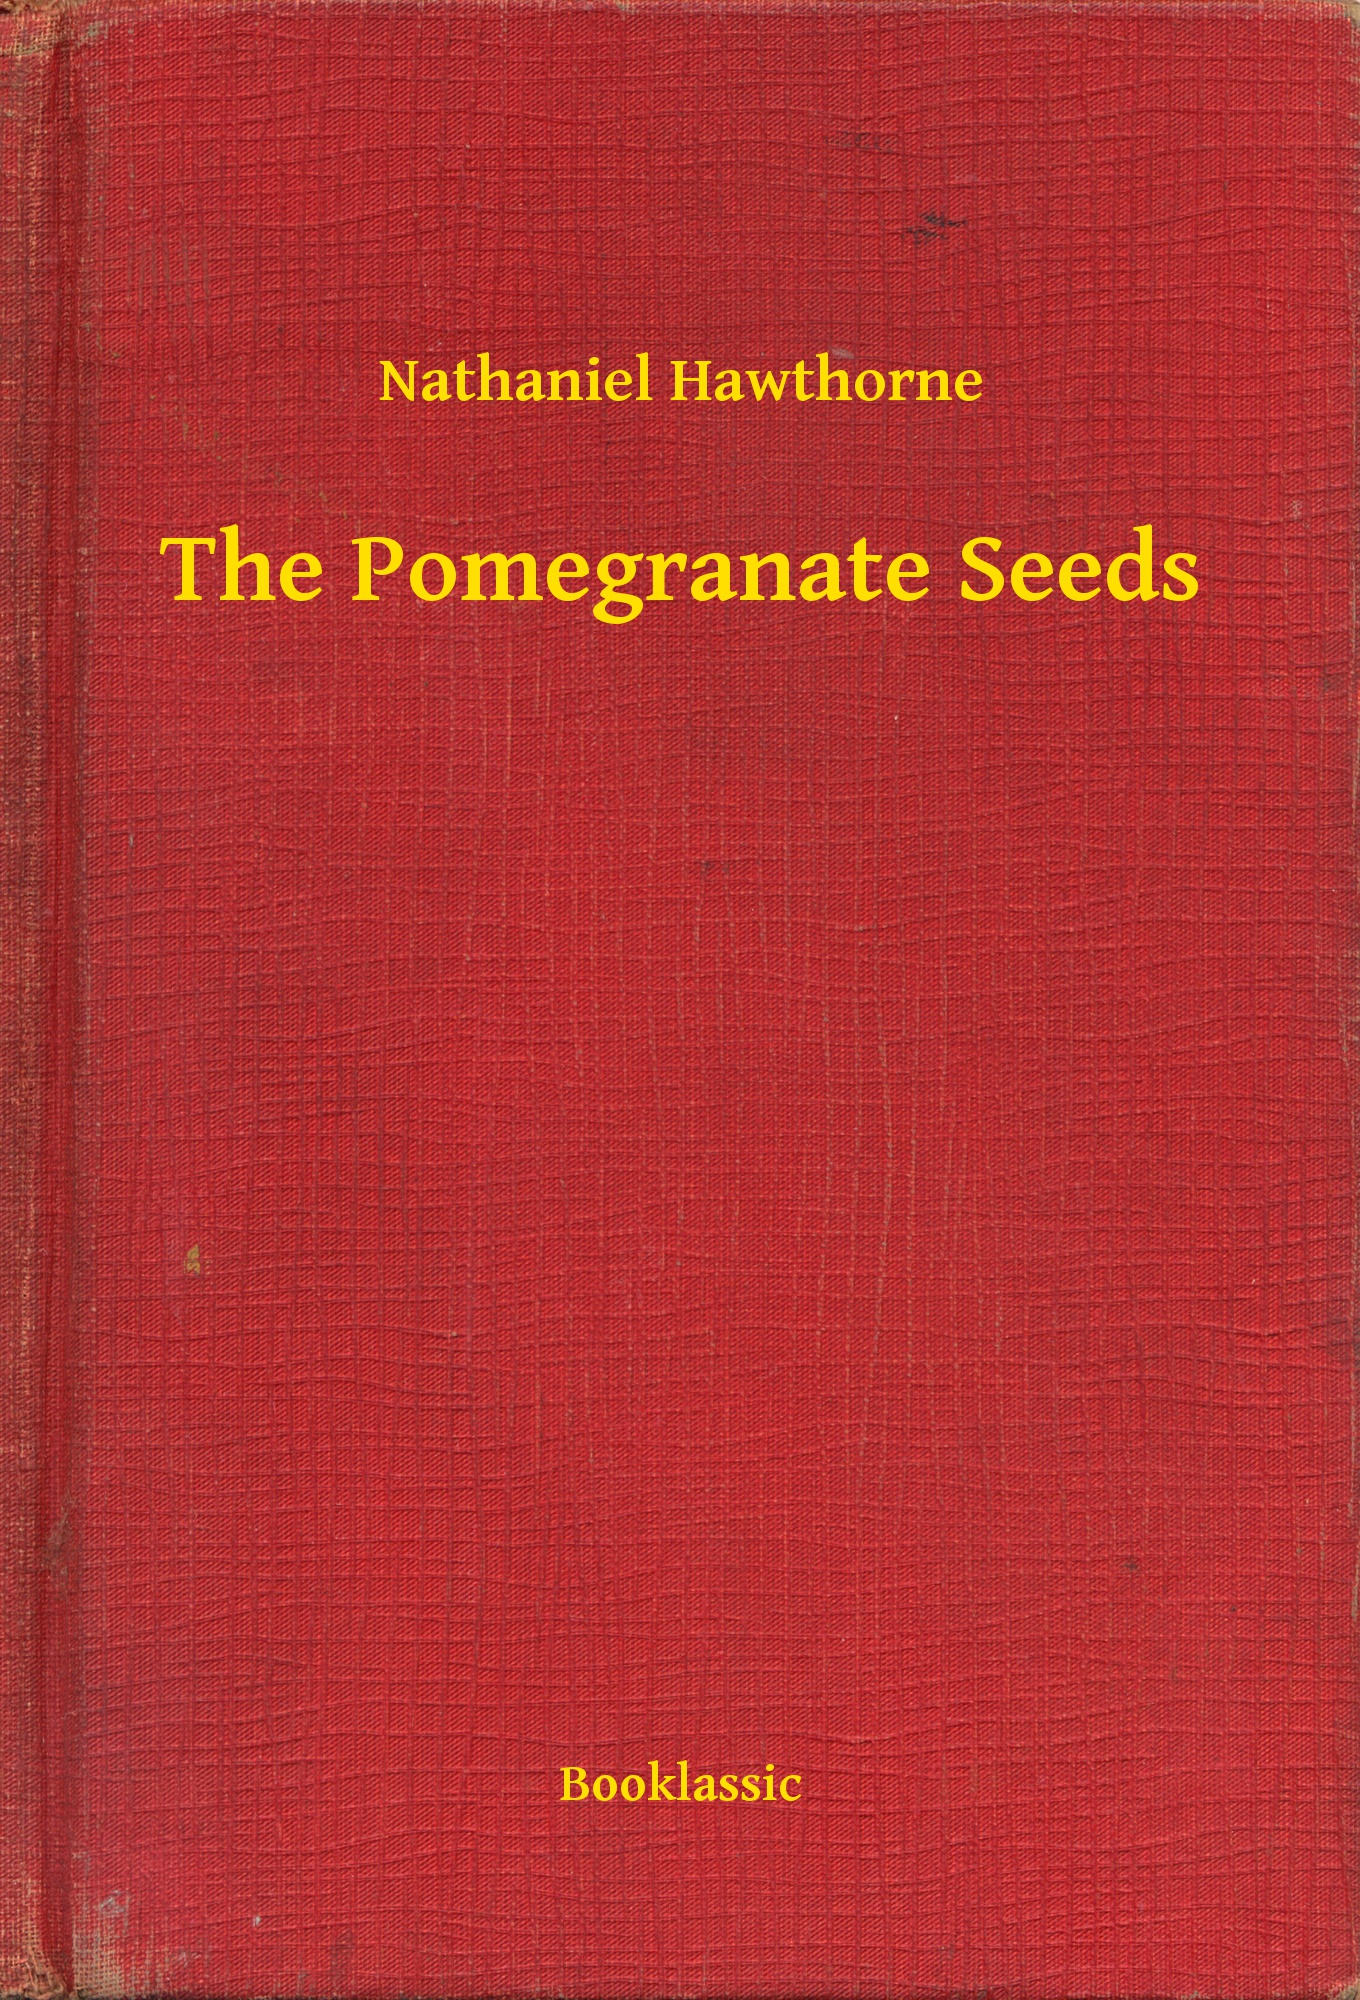 The Pomegranate Seeds